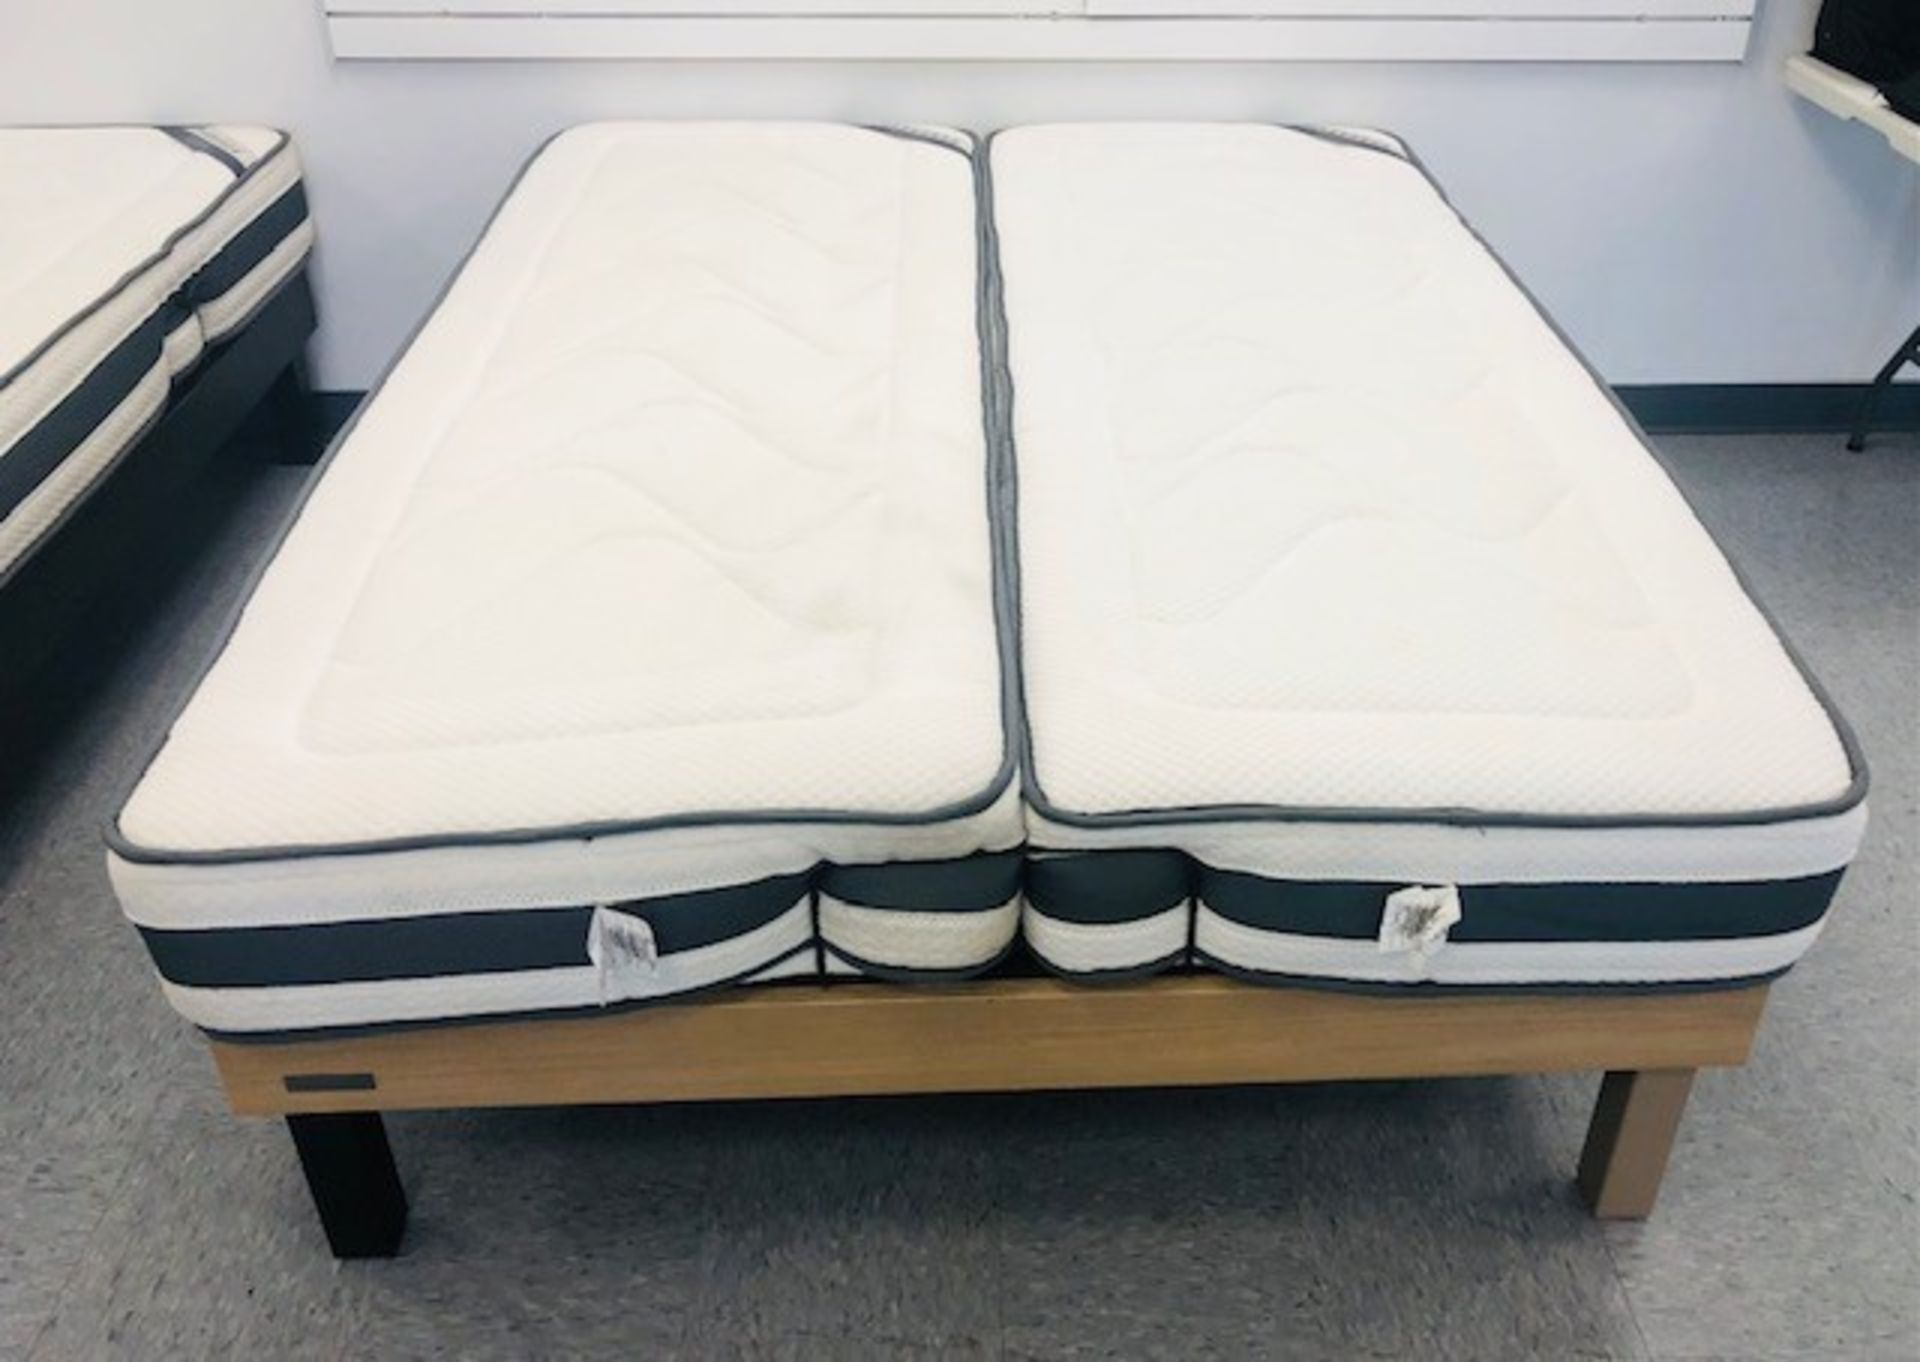 NATURE & PUR Memory Foam Mattress mod. ROYAL LUXE V2, size: 1/2 Queen, 30" x 79.5", hypoallergenic, - Image 2 of 4